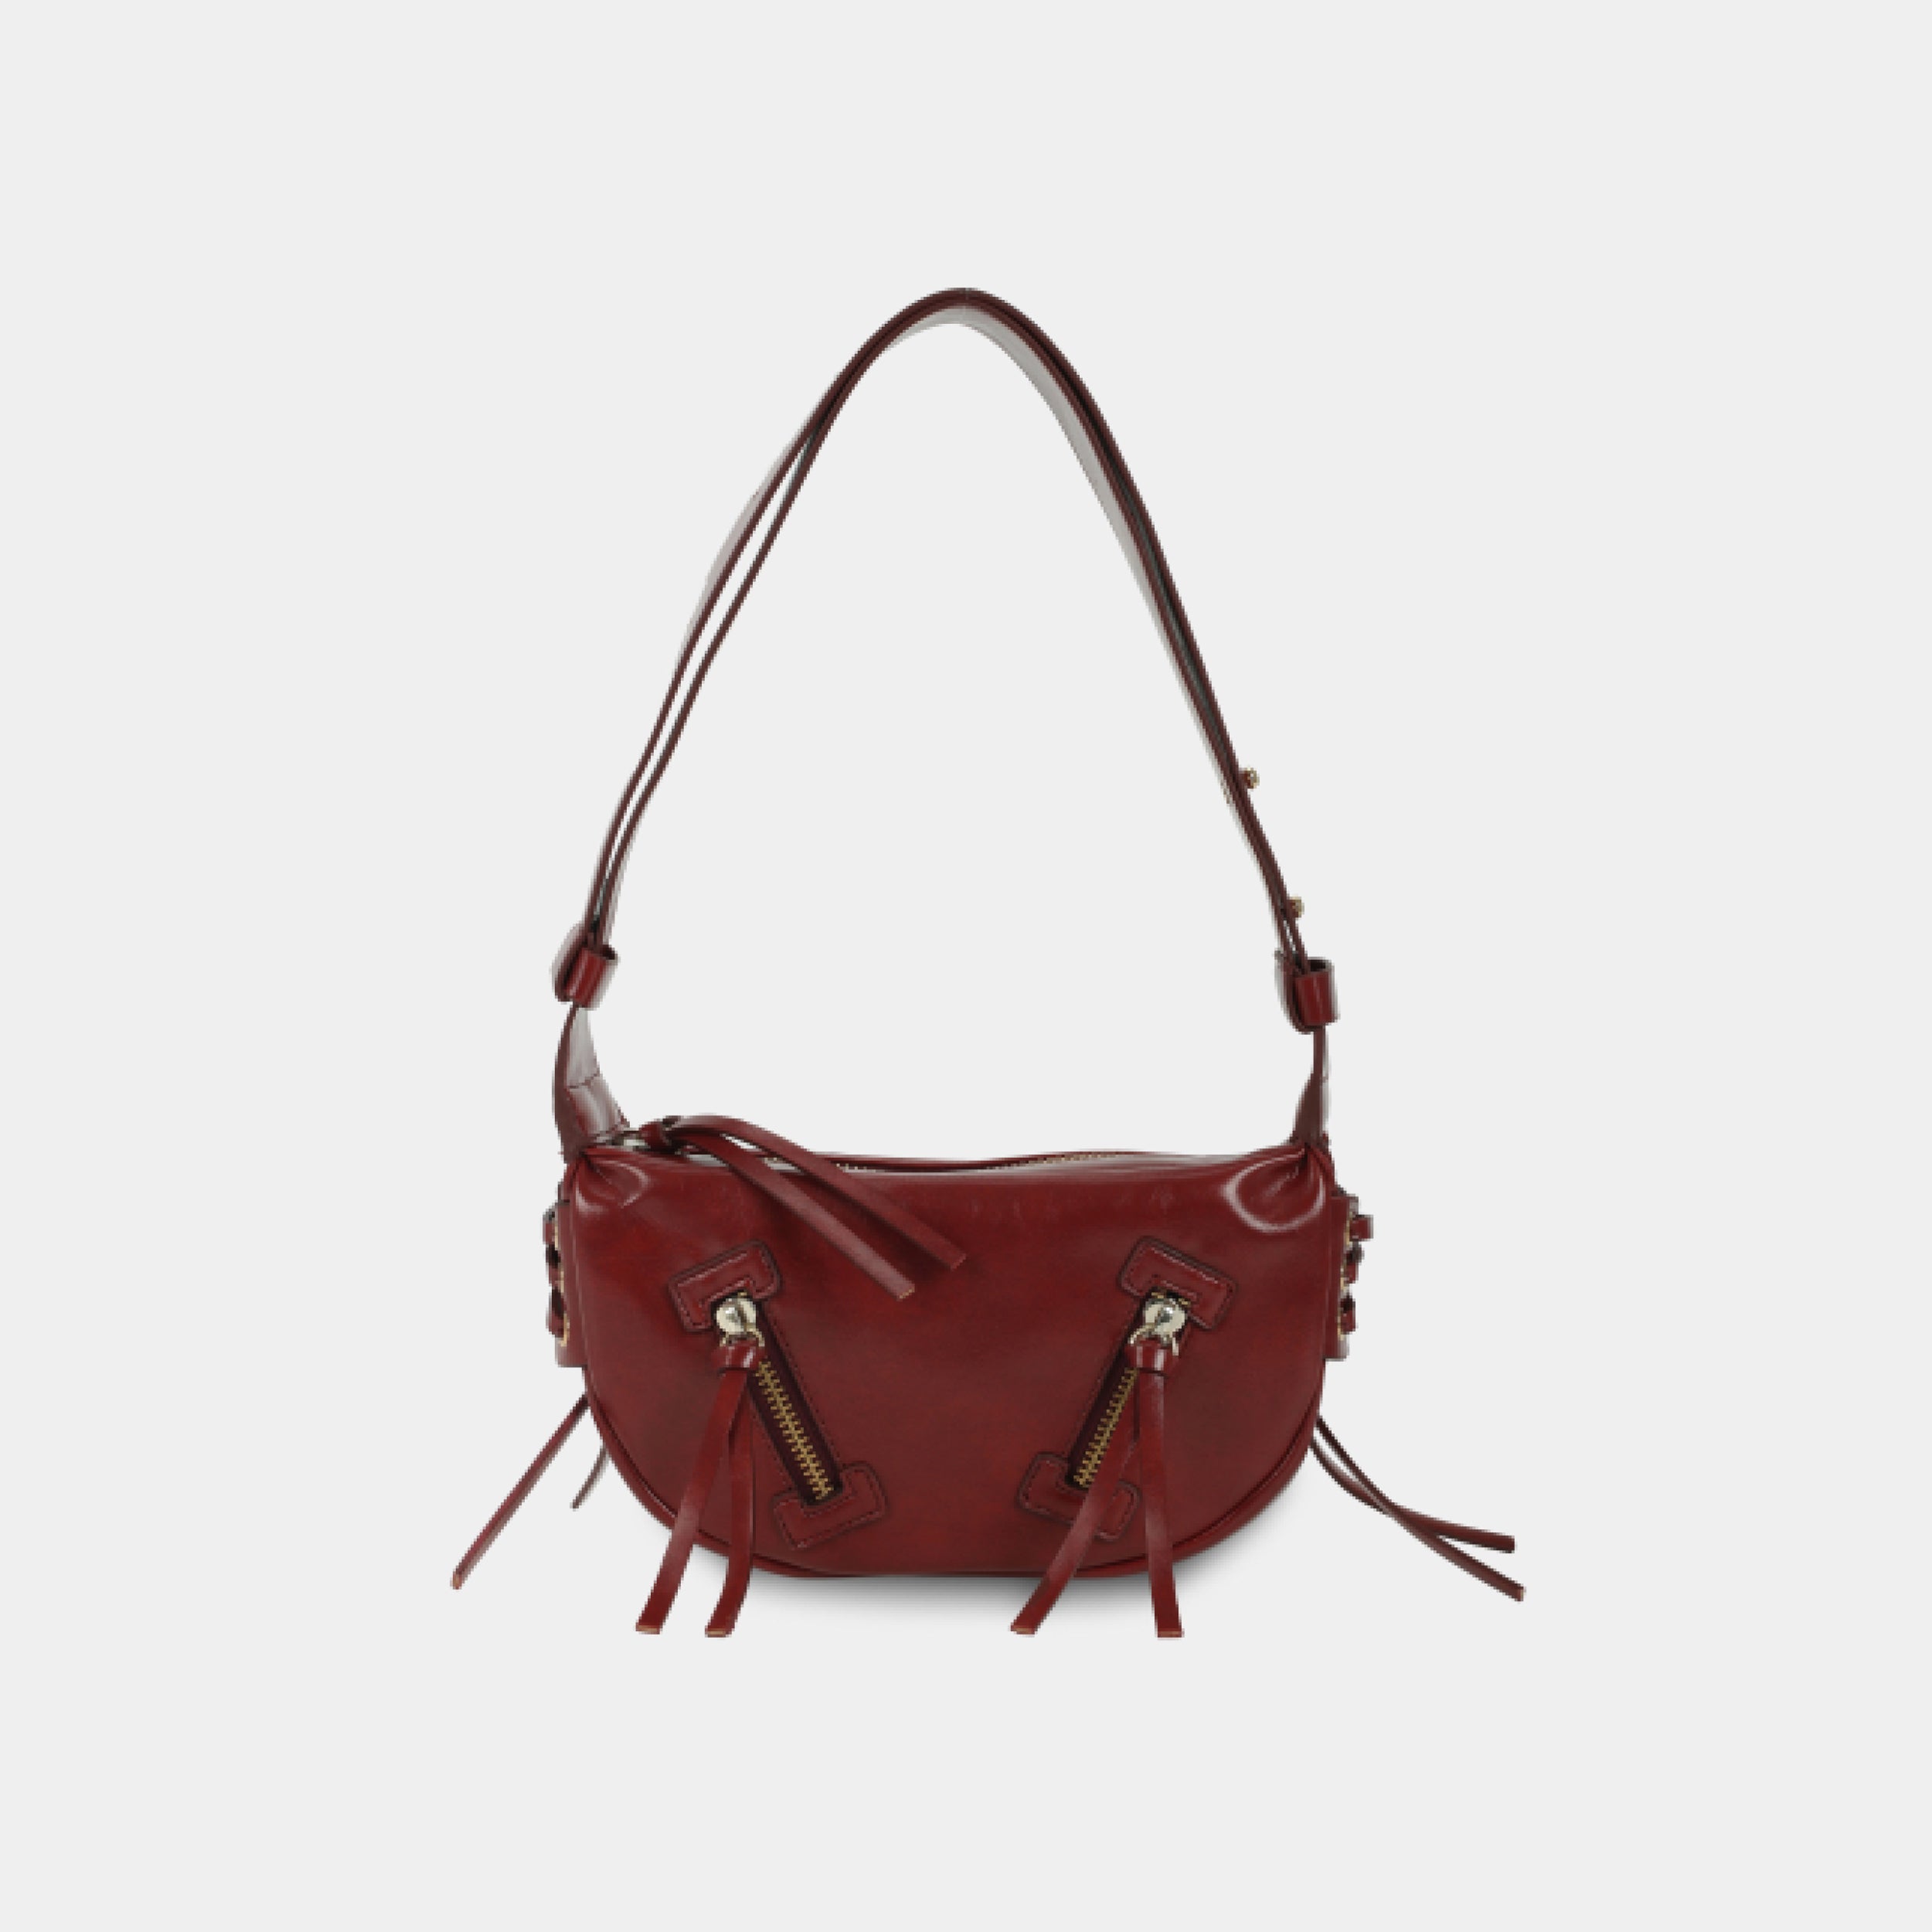 LACE bag small size (S) red color